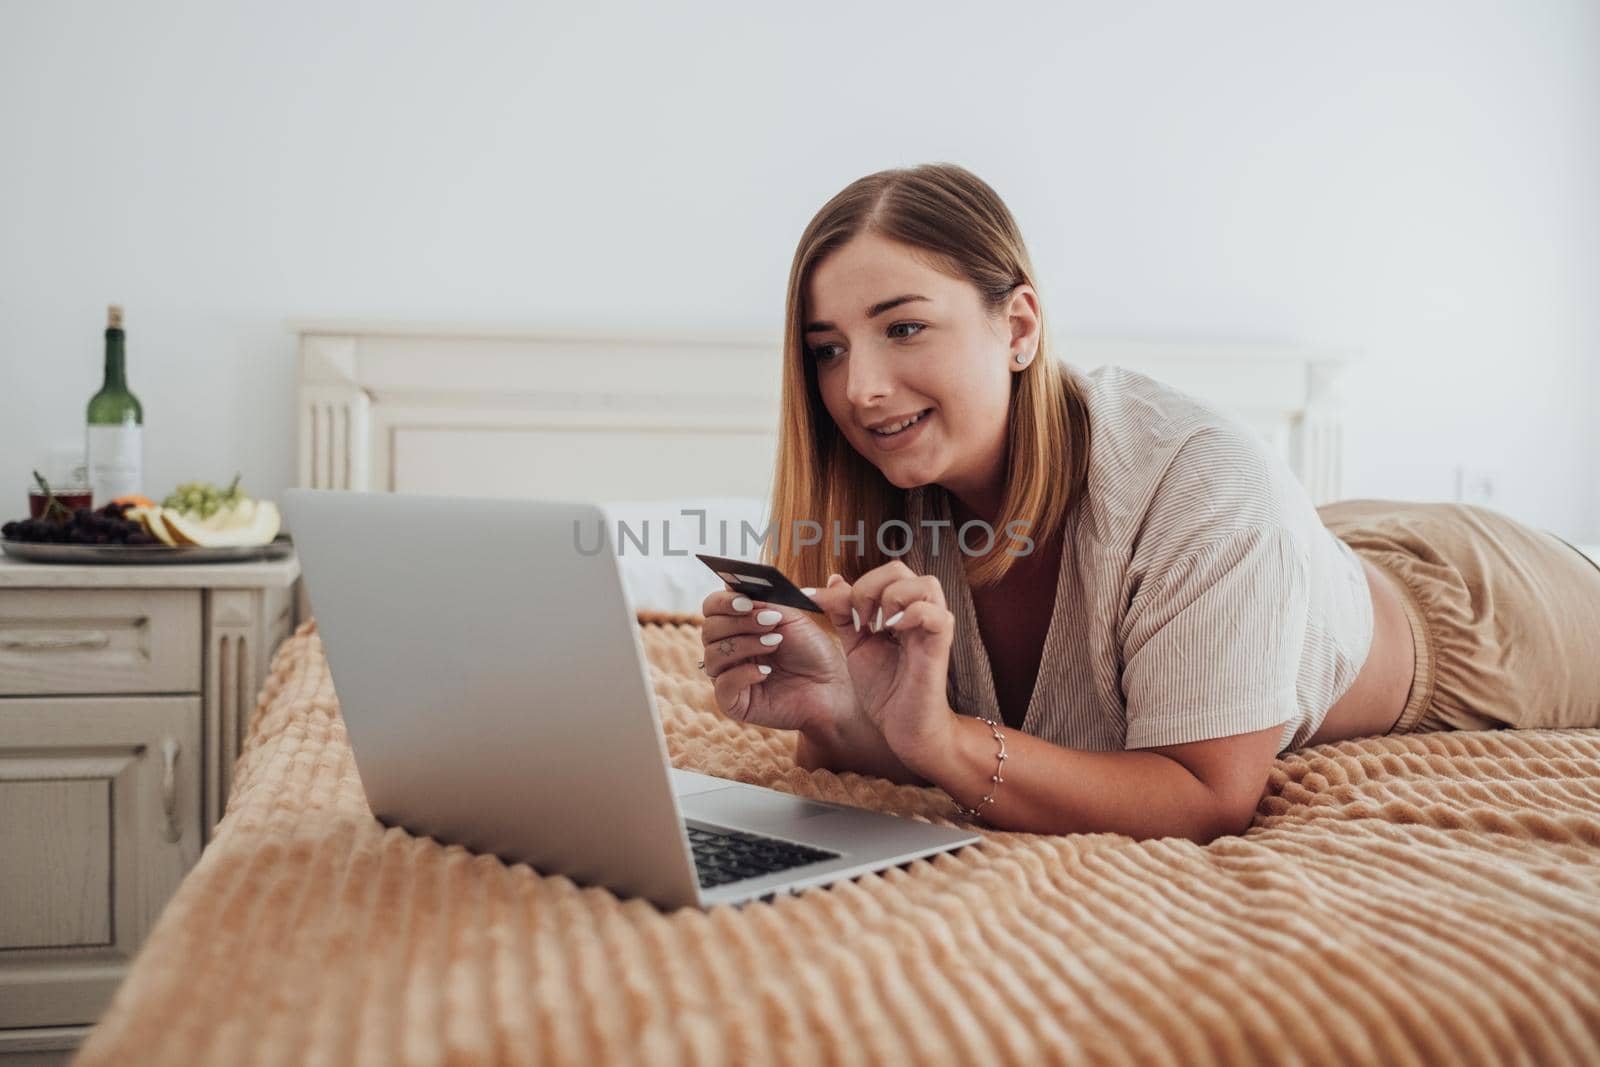 Caucasian Young Woman Making Online Shopping Through Laptop While Laying on Bed of Hotel Room